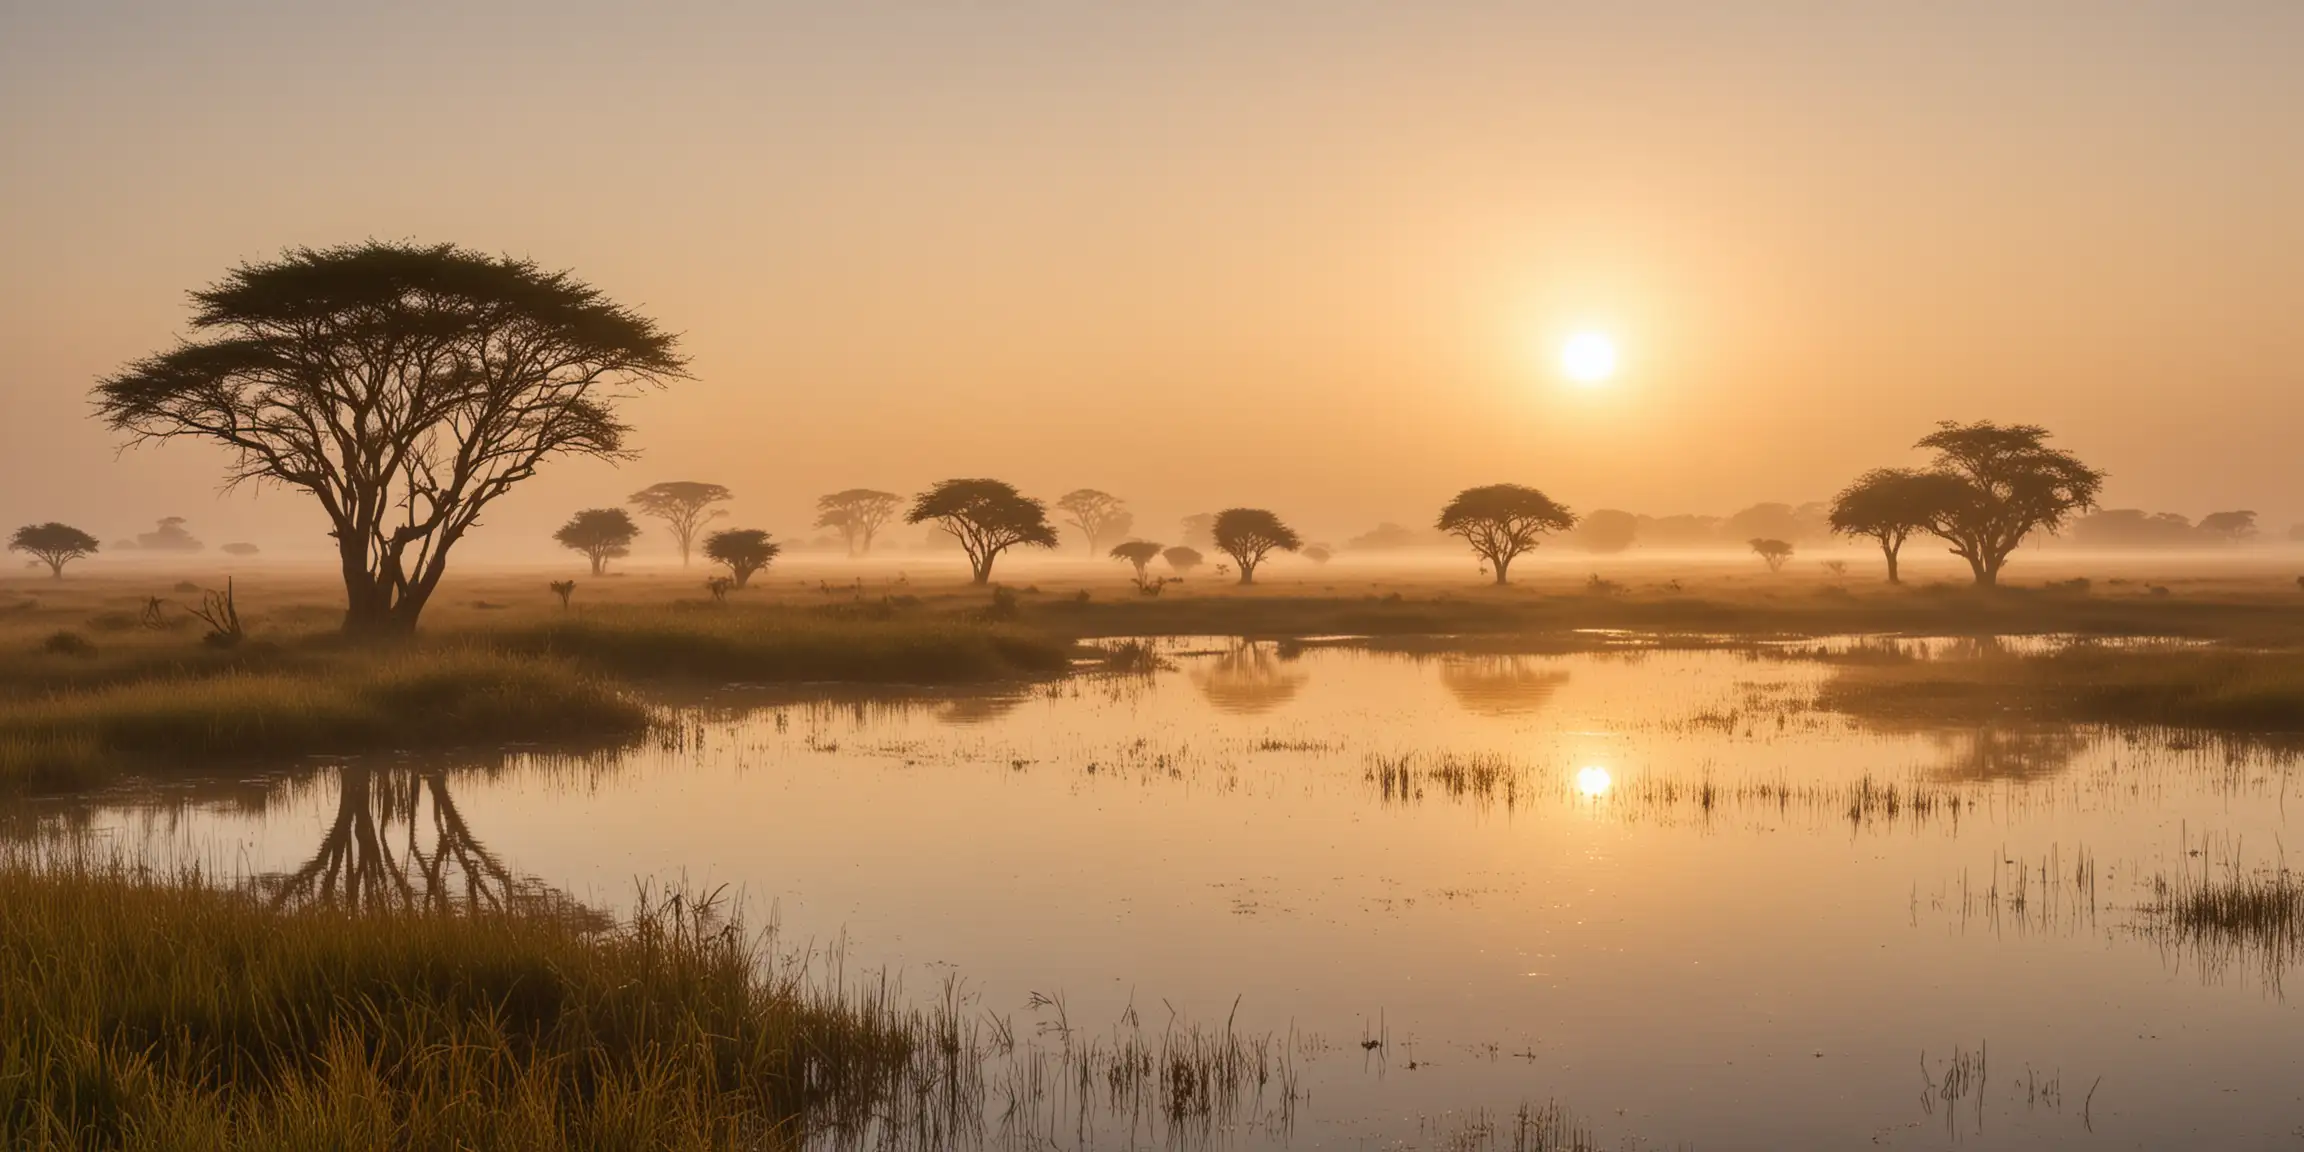 Scenic African Prairie Landscape with Pond at Bright Foggy Sunrise